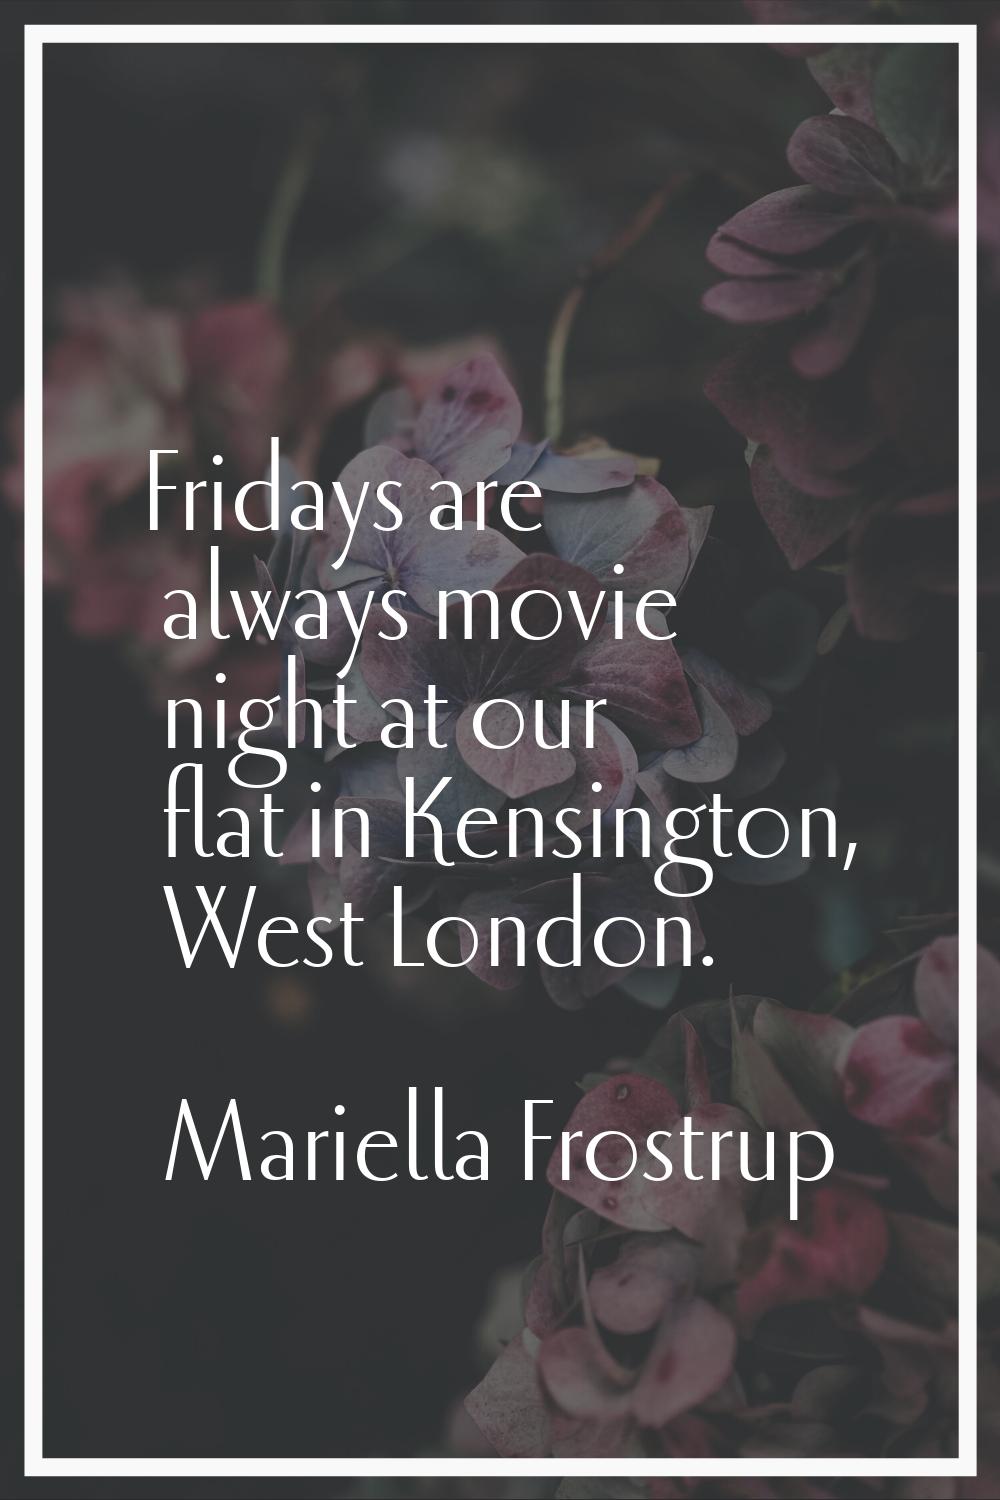 Fridays are always movie night at our flat in Kensington, West London.